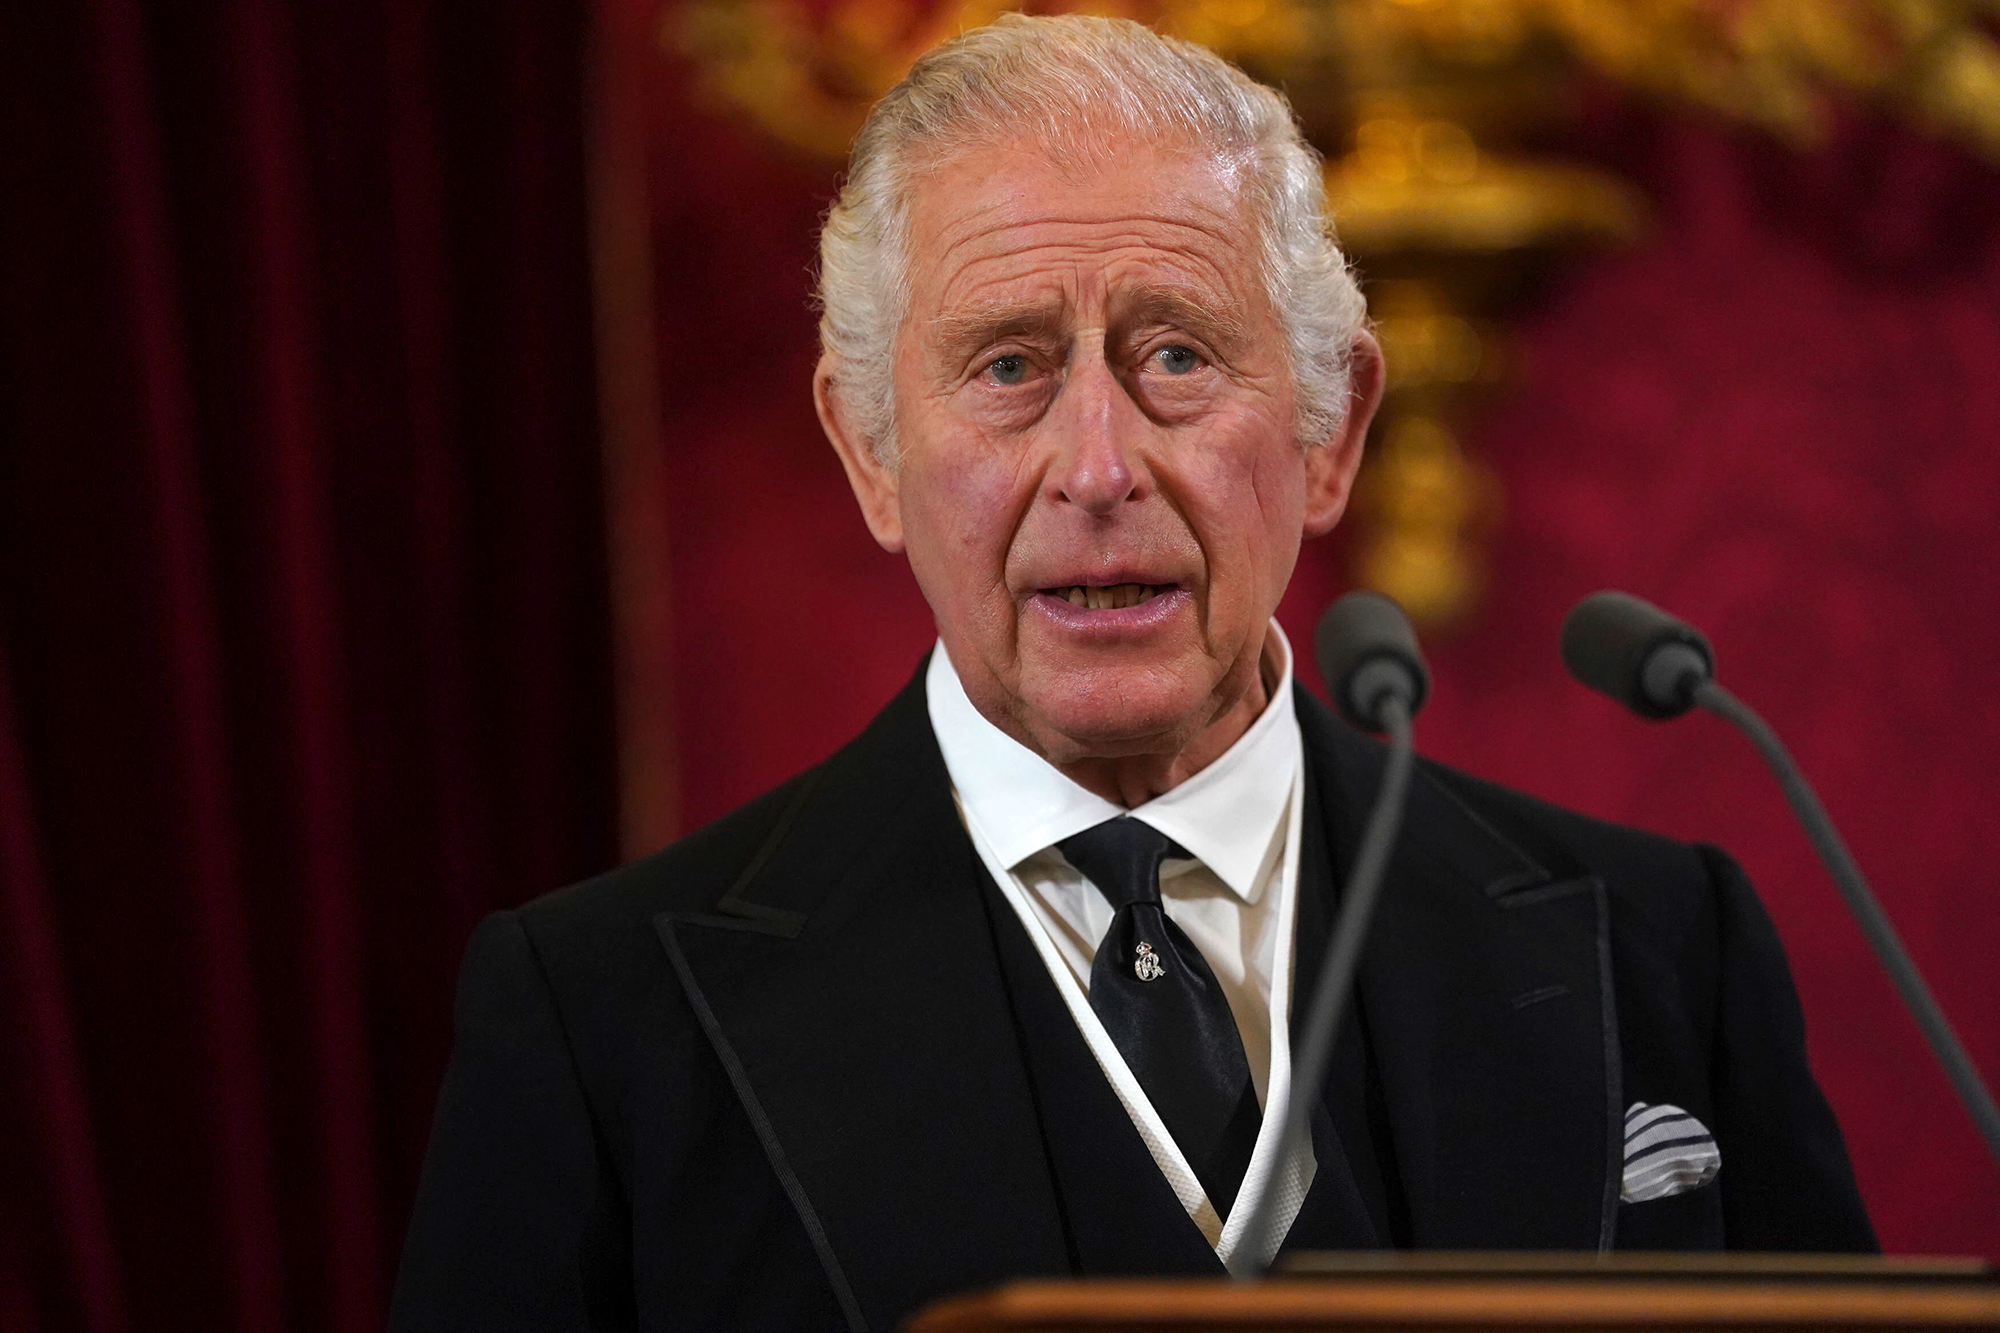 King Charles III speaks during the Accession Council at St. James's Palace, in London, on Saturday, September 10. 